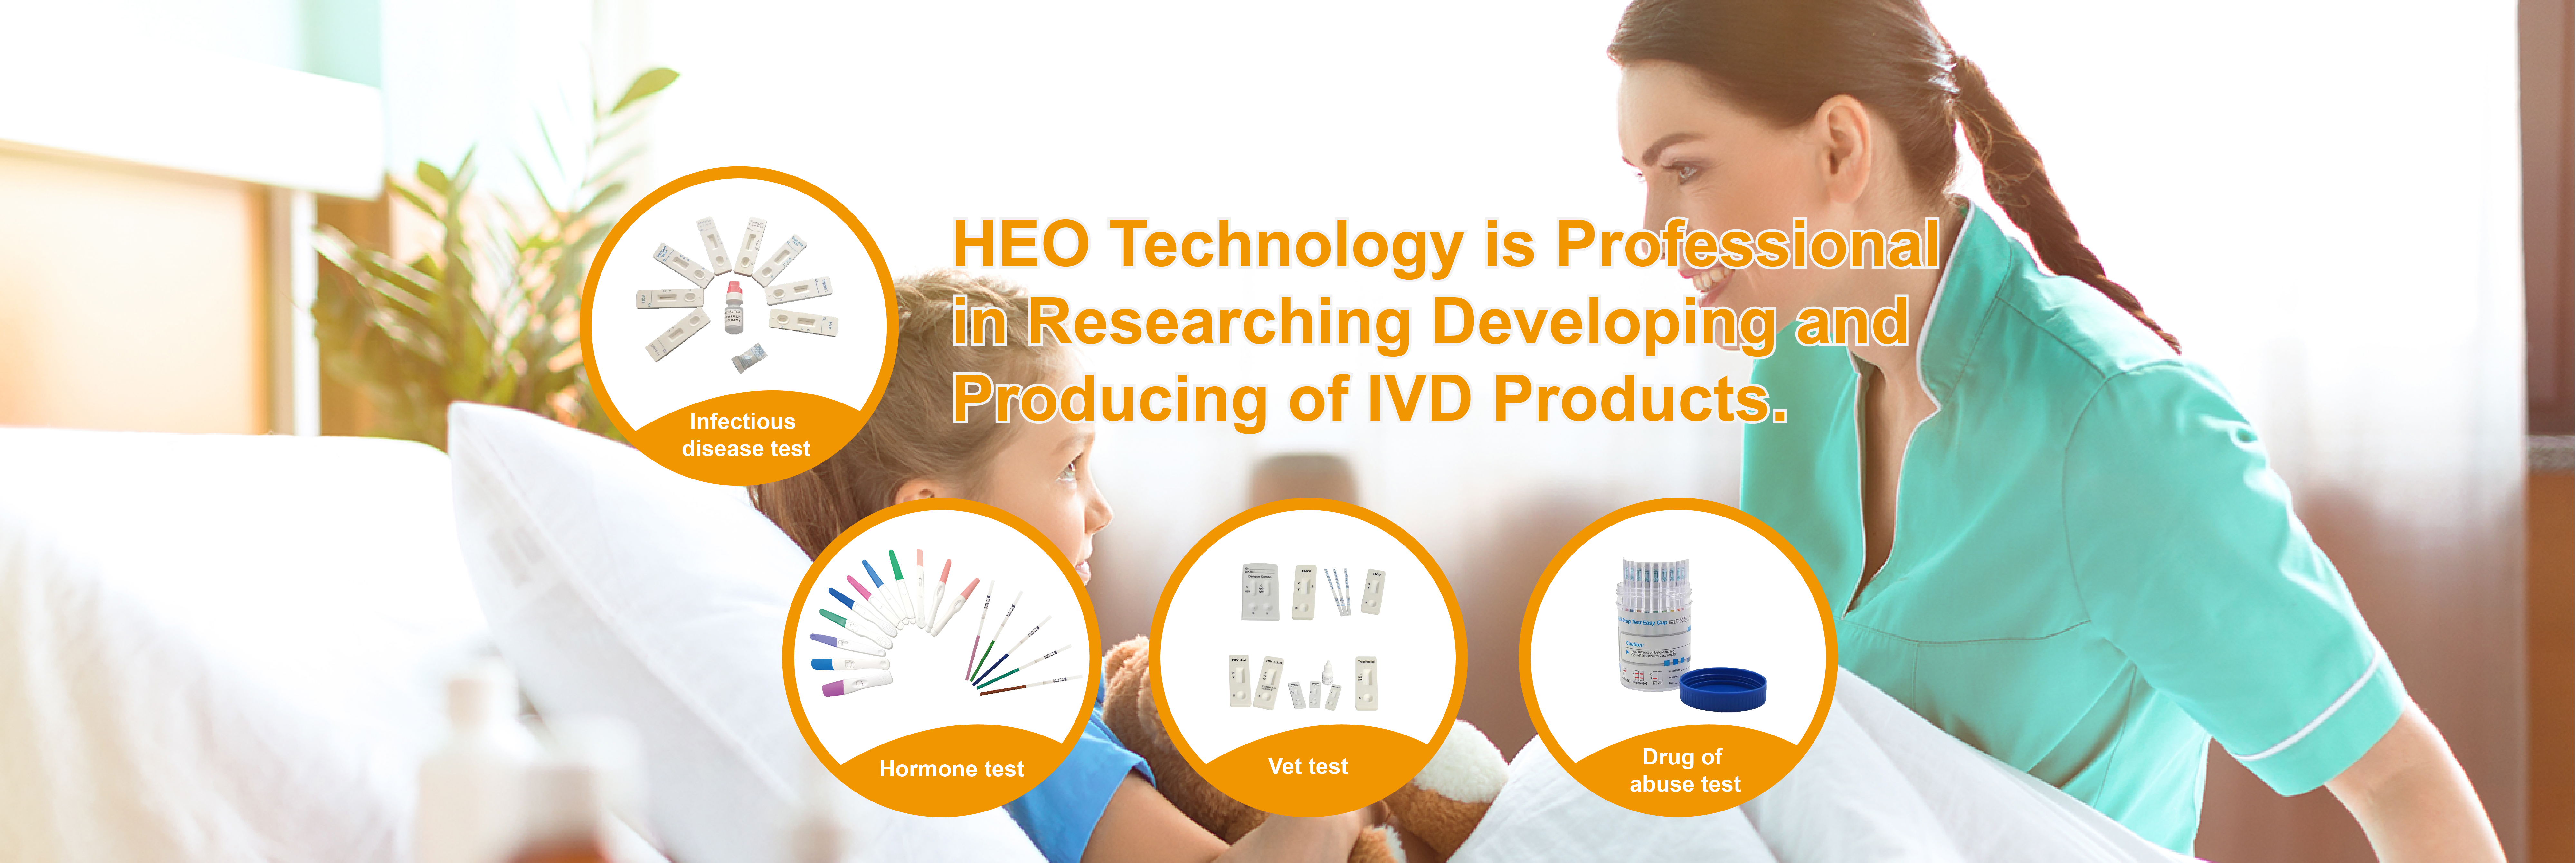 HEO TECHNOLOGY IVD PRODUCTS BANNER1